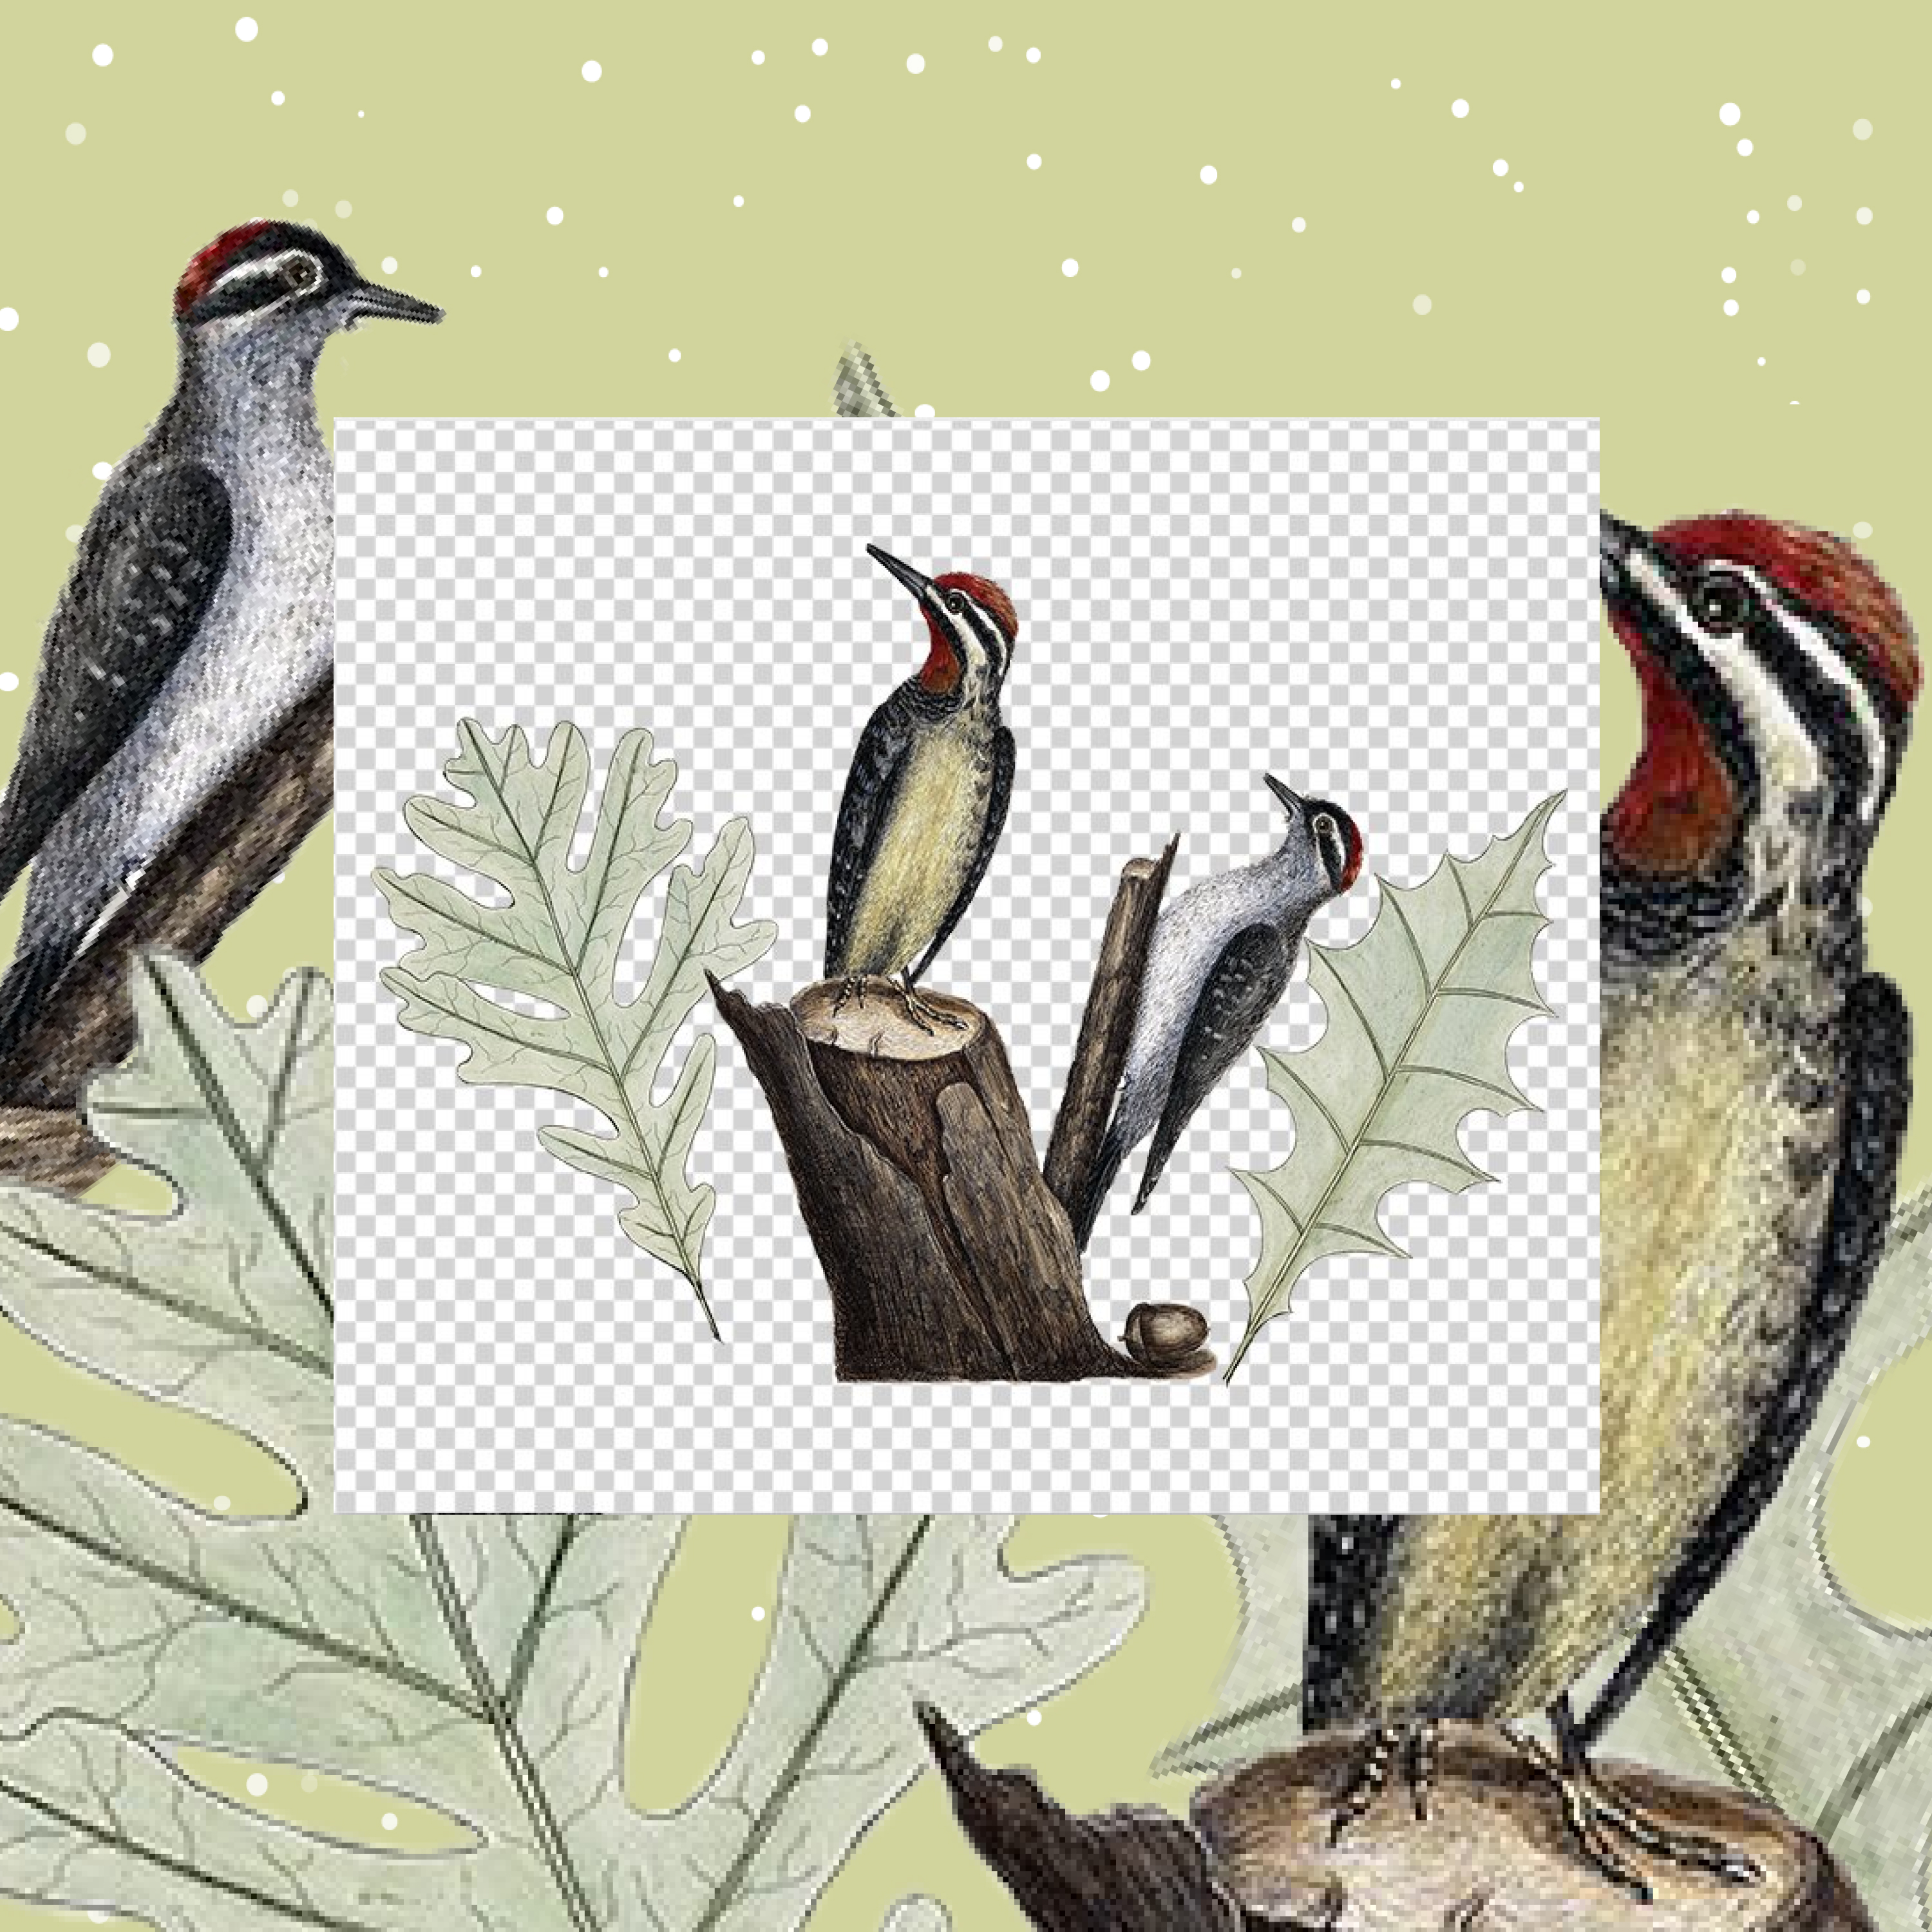 The image of woodpeckers looks very interesting.